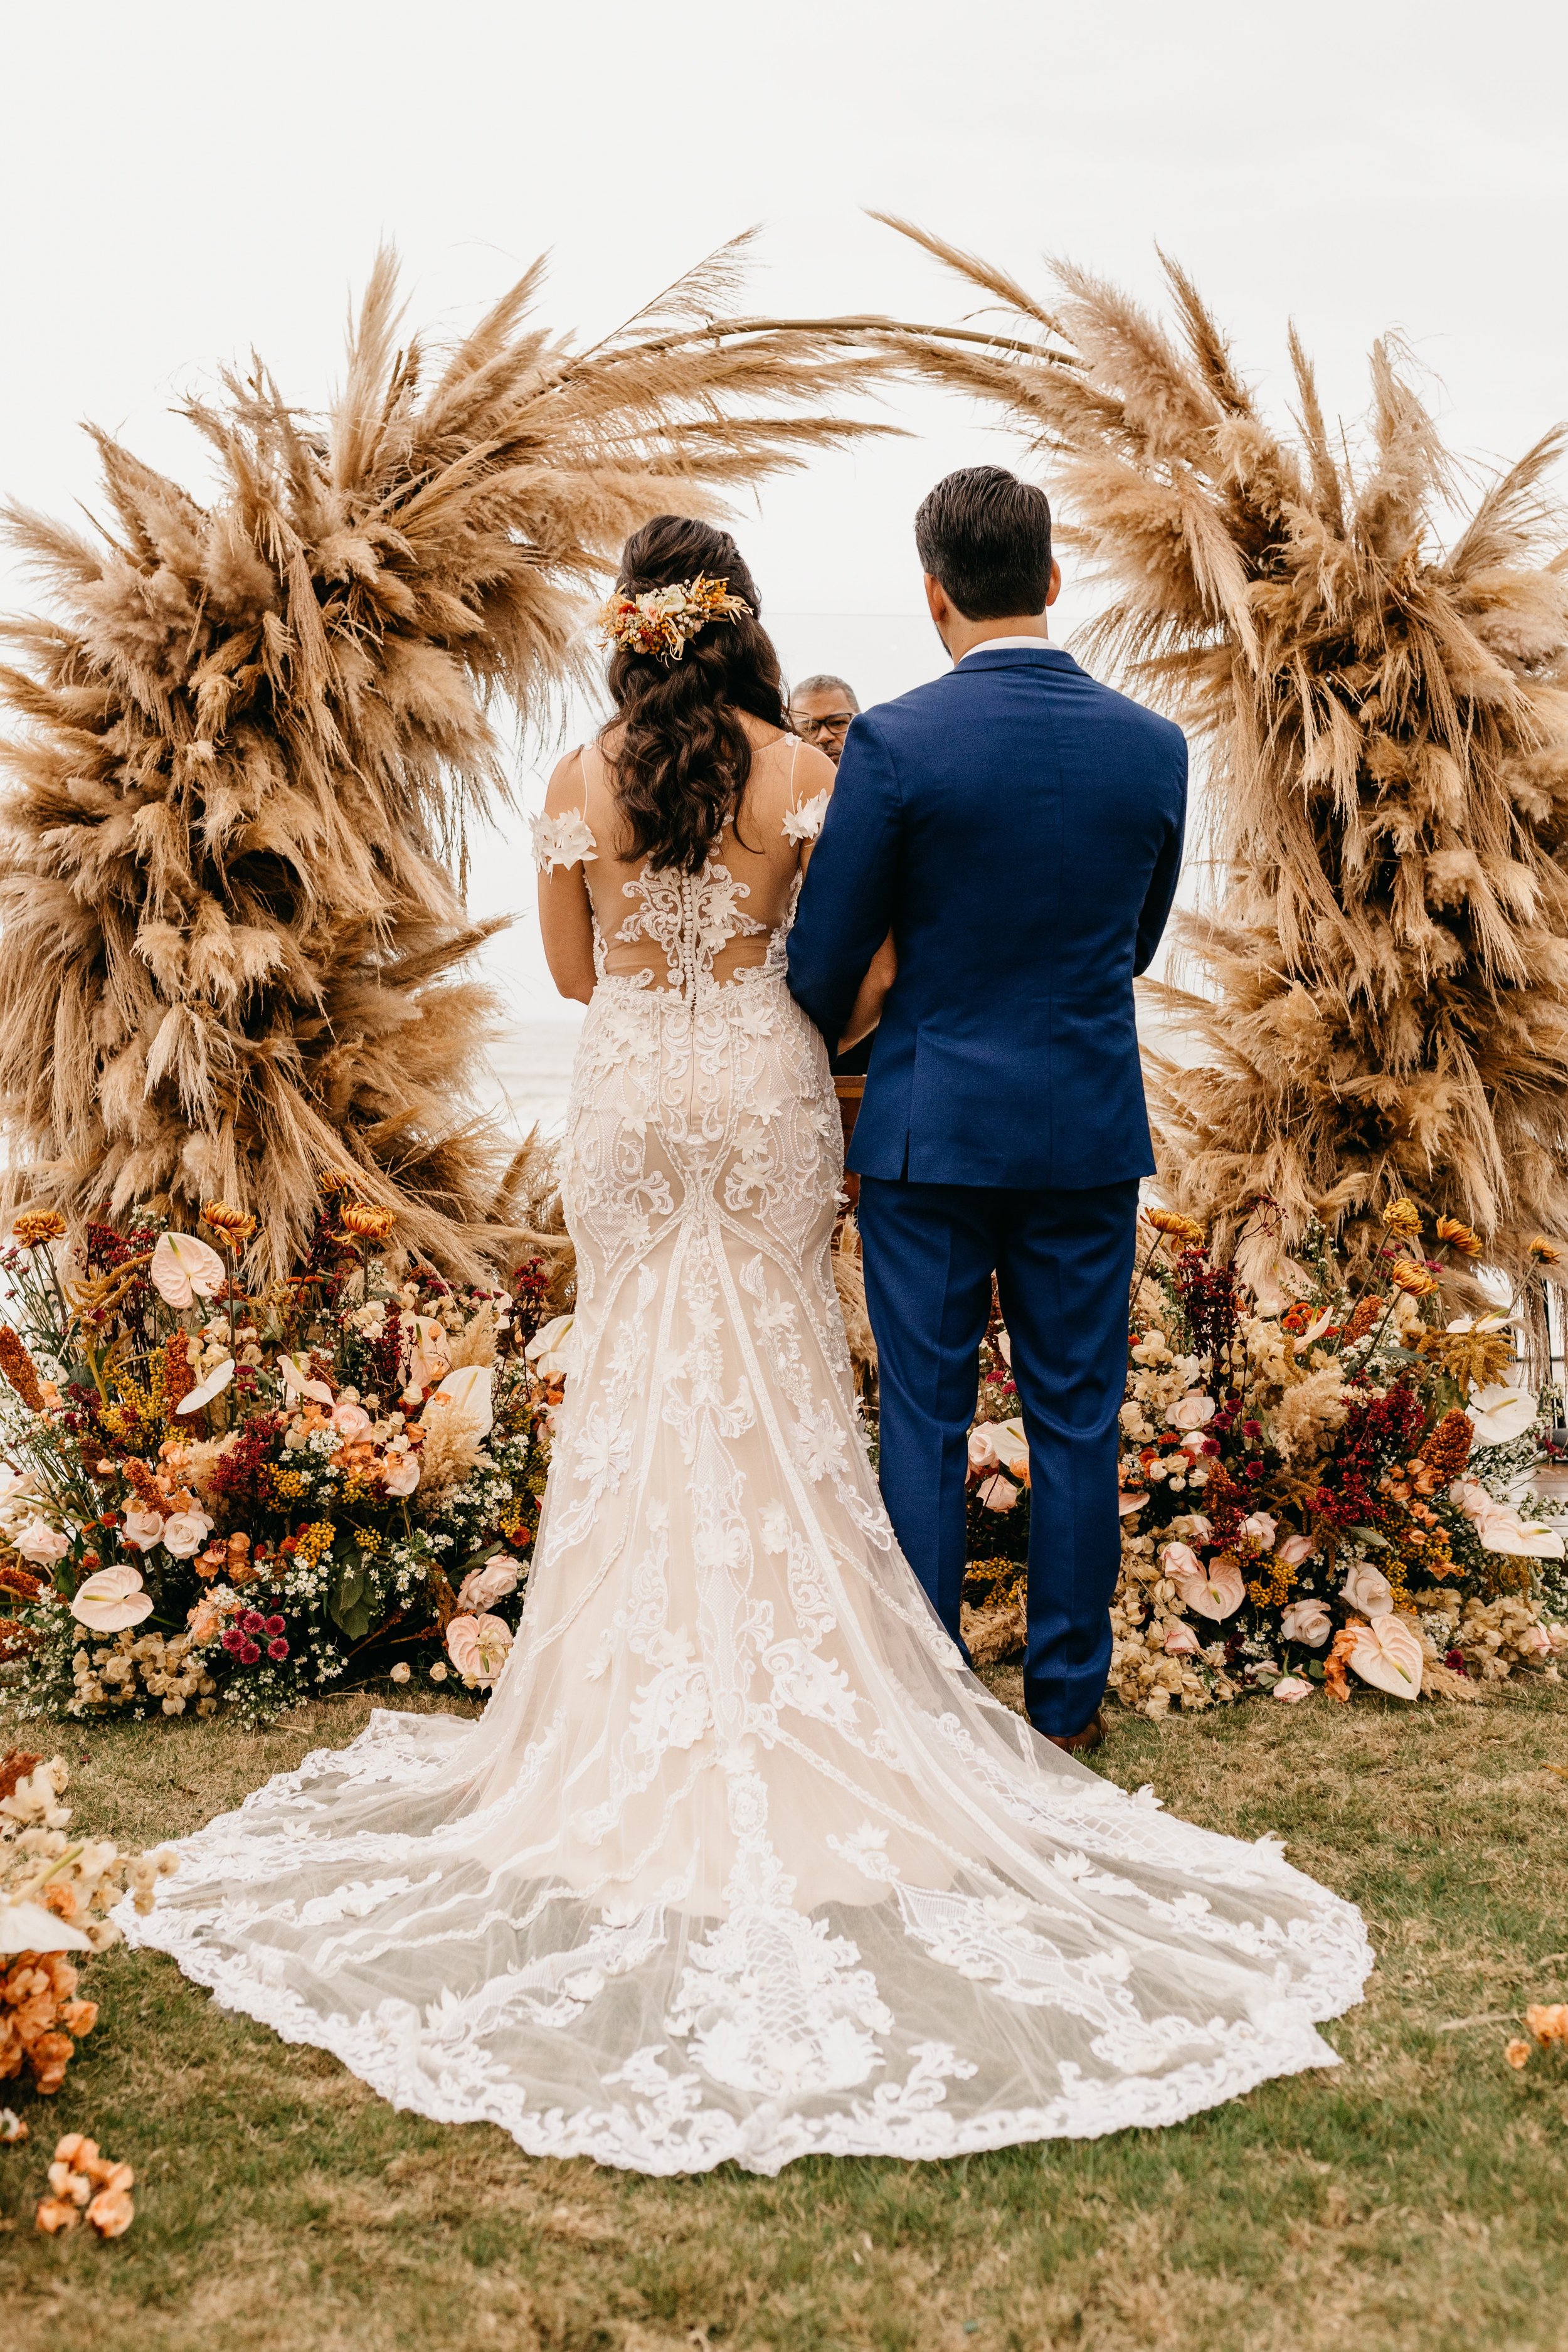 Everything You Need to Know About Planning the Ideal Wedding